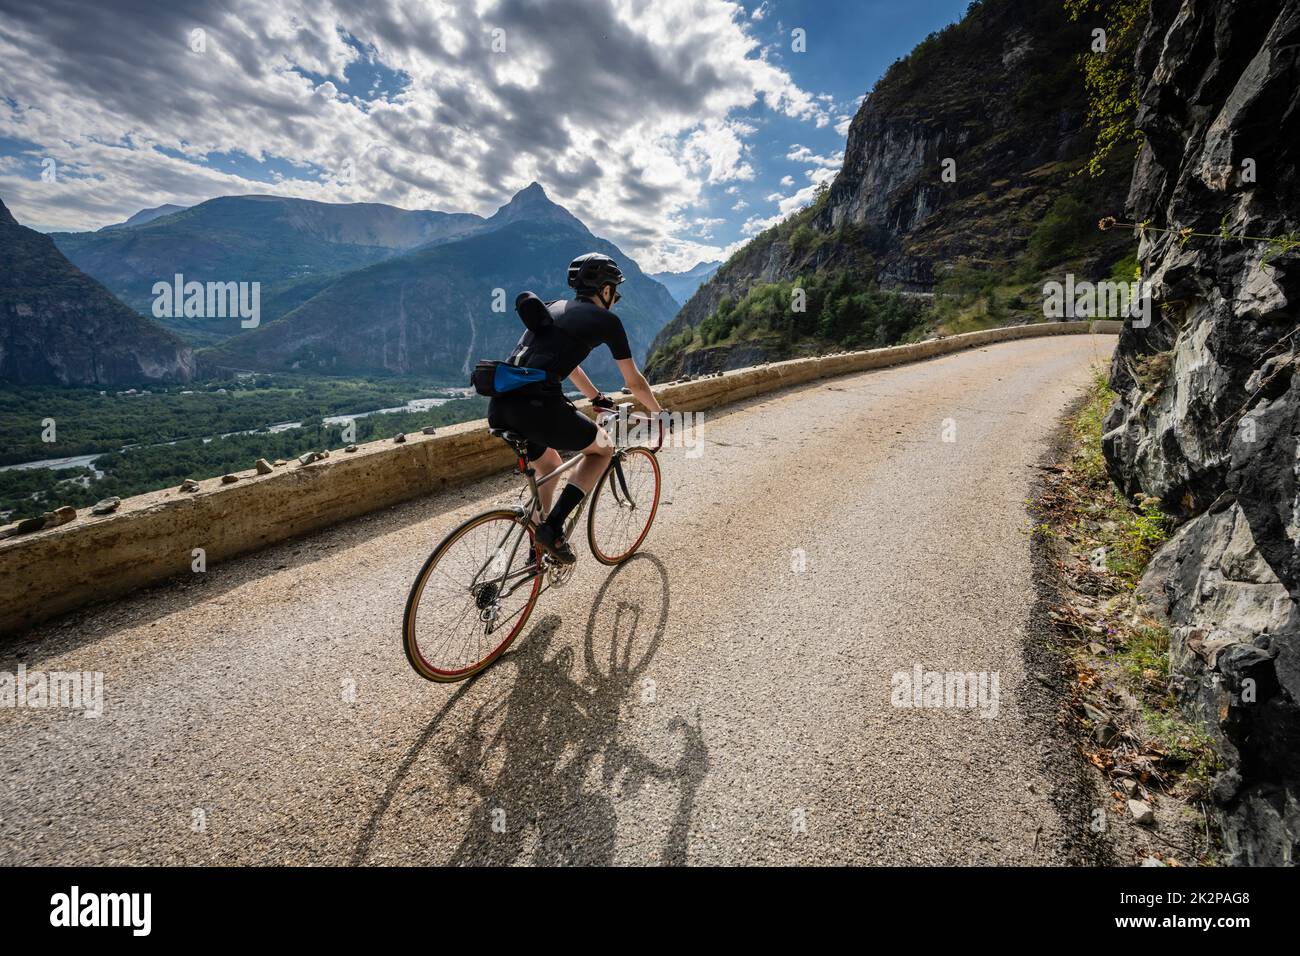 Male road cyclist riding up the balcony road to Villard Notre Dame from Bourg d'Oisans, French Alps. Stock Photo